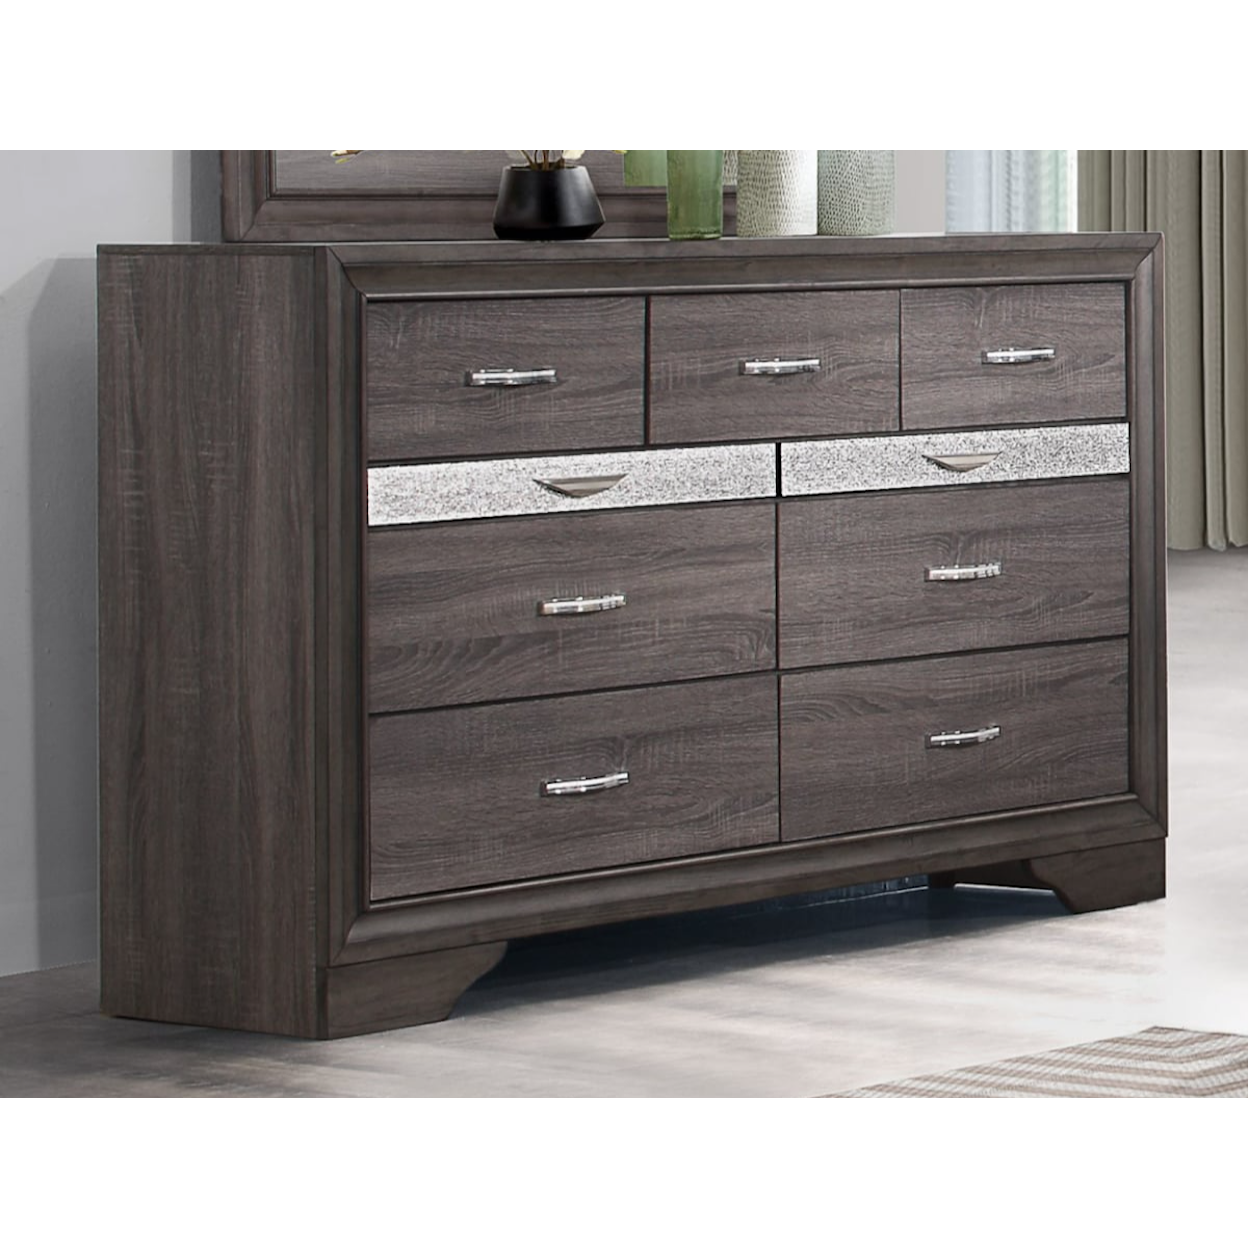 Global Furniture Seville Dresser with Jewelry Drawers